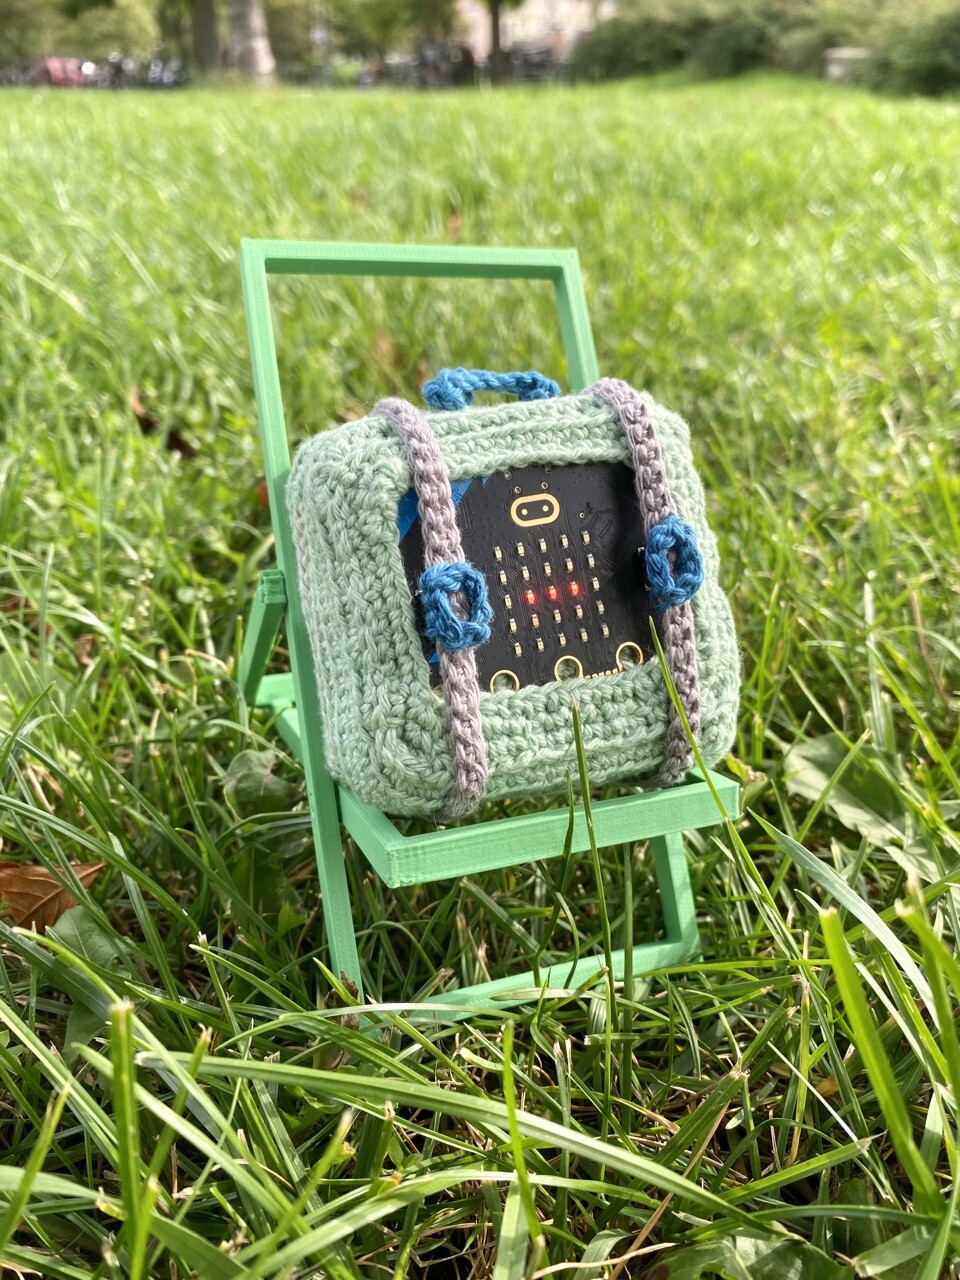 A pastel green crocheted travel suitcase with grey straps and blue handles. The front of the case is embedded with a Micro:Bit, which is an electronic microcontroller board with a grid of LEDs. Some of the LEDs are glowing and the straps cover the buttons __on the board. The suitcase rests on a 3D printed deck chair laid on some grass in a park.